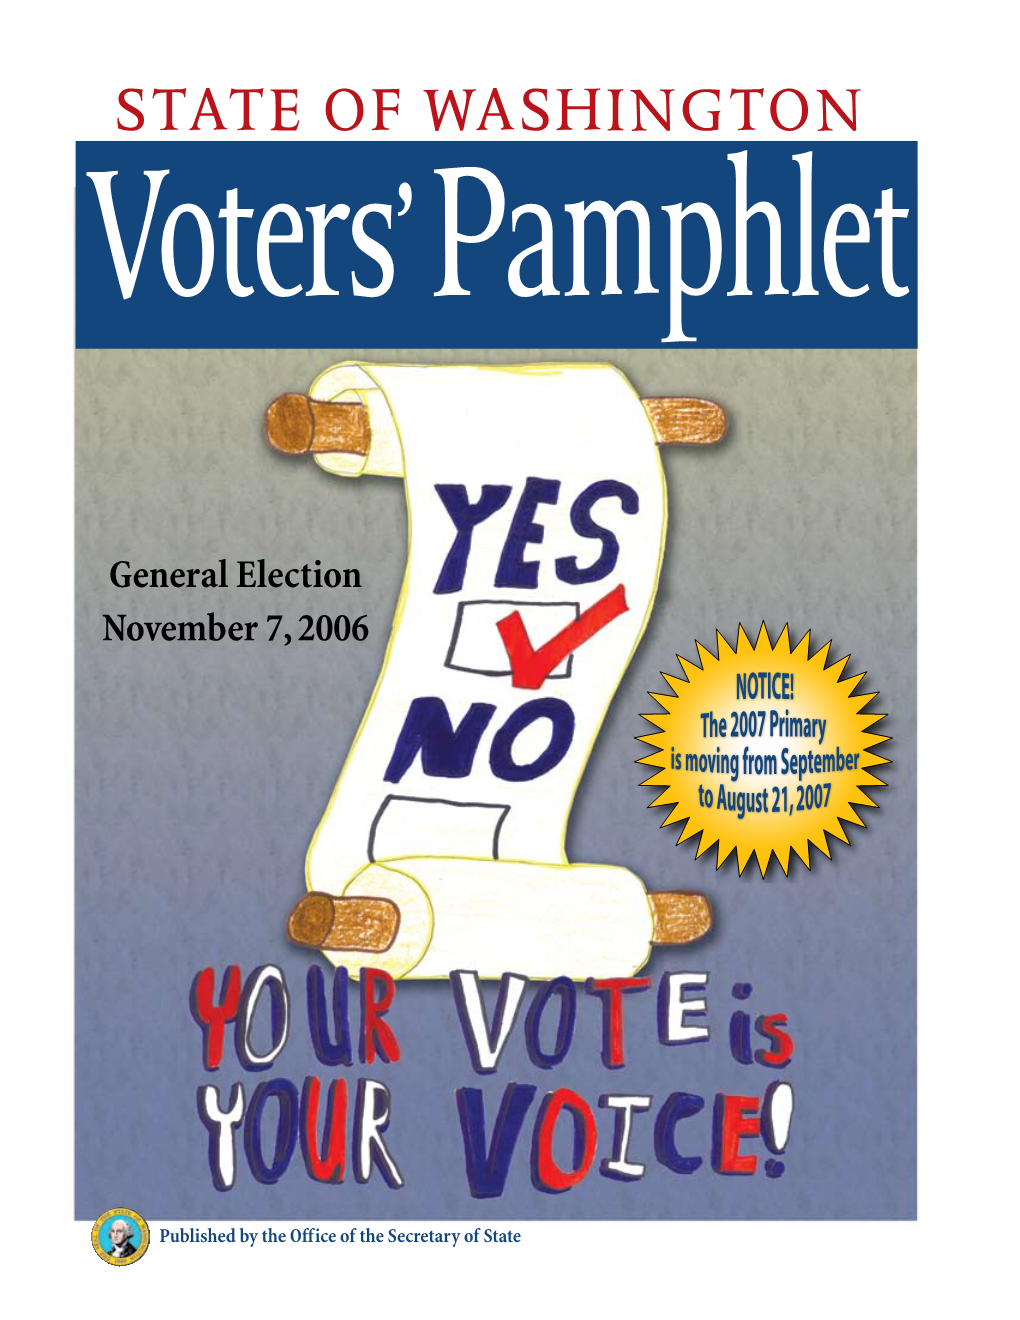 Introduction to the 2006 Voters' Pamphlet